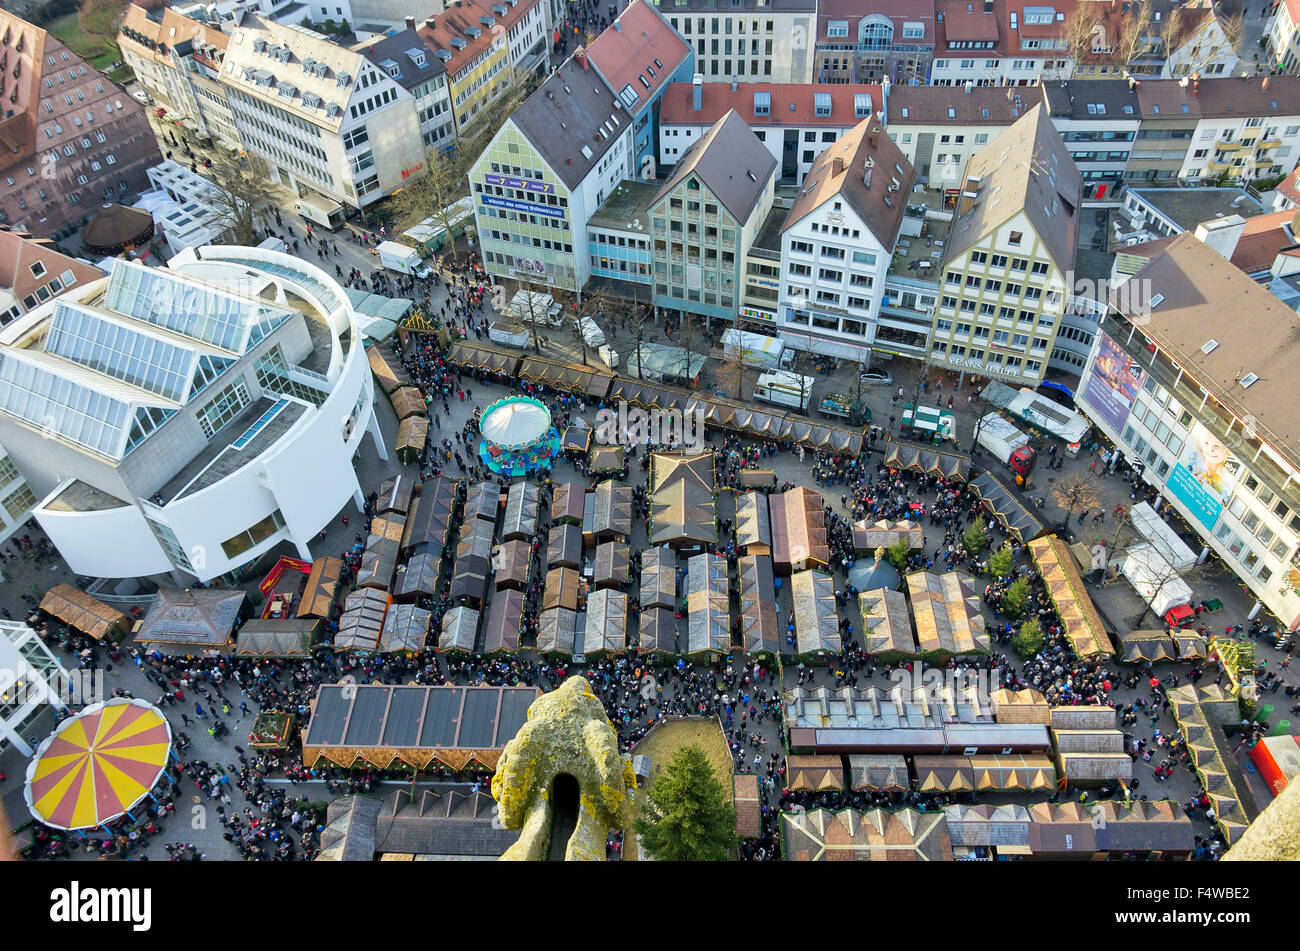 The Christmas market of Ulm, Germany, as seen as from the Minster on December 13th, 2014. Stock Photo